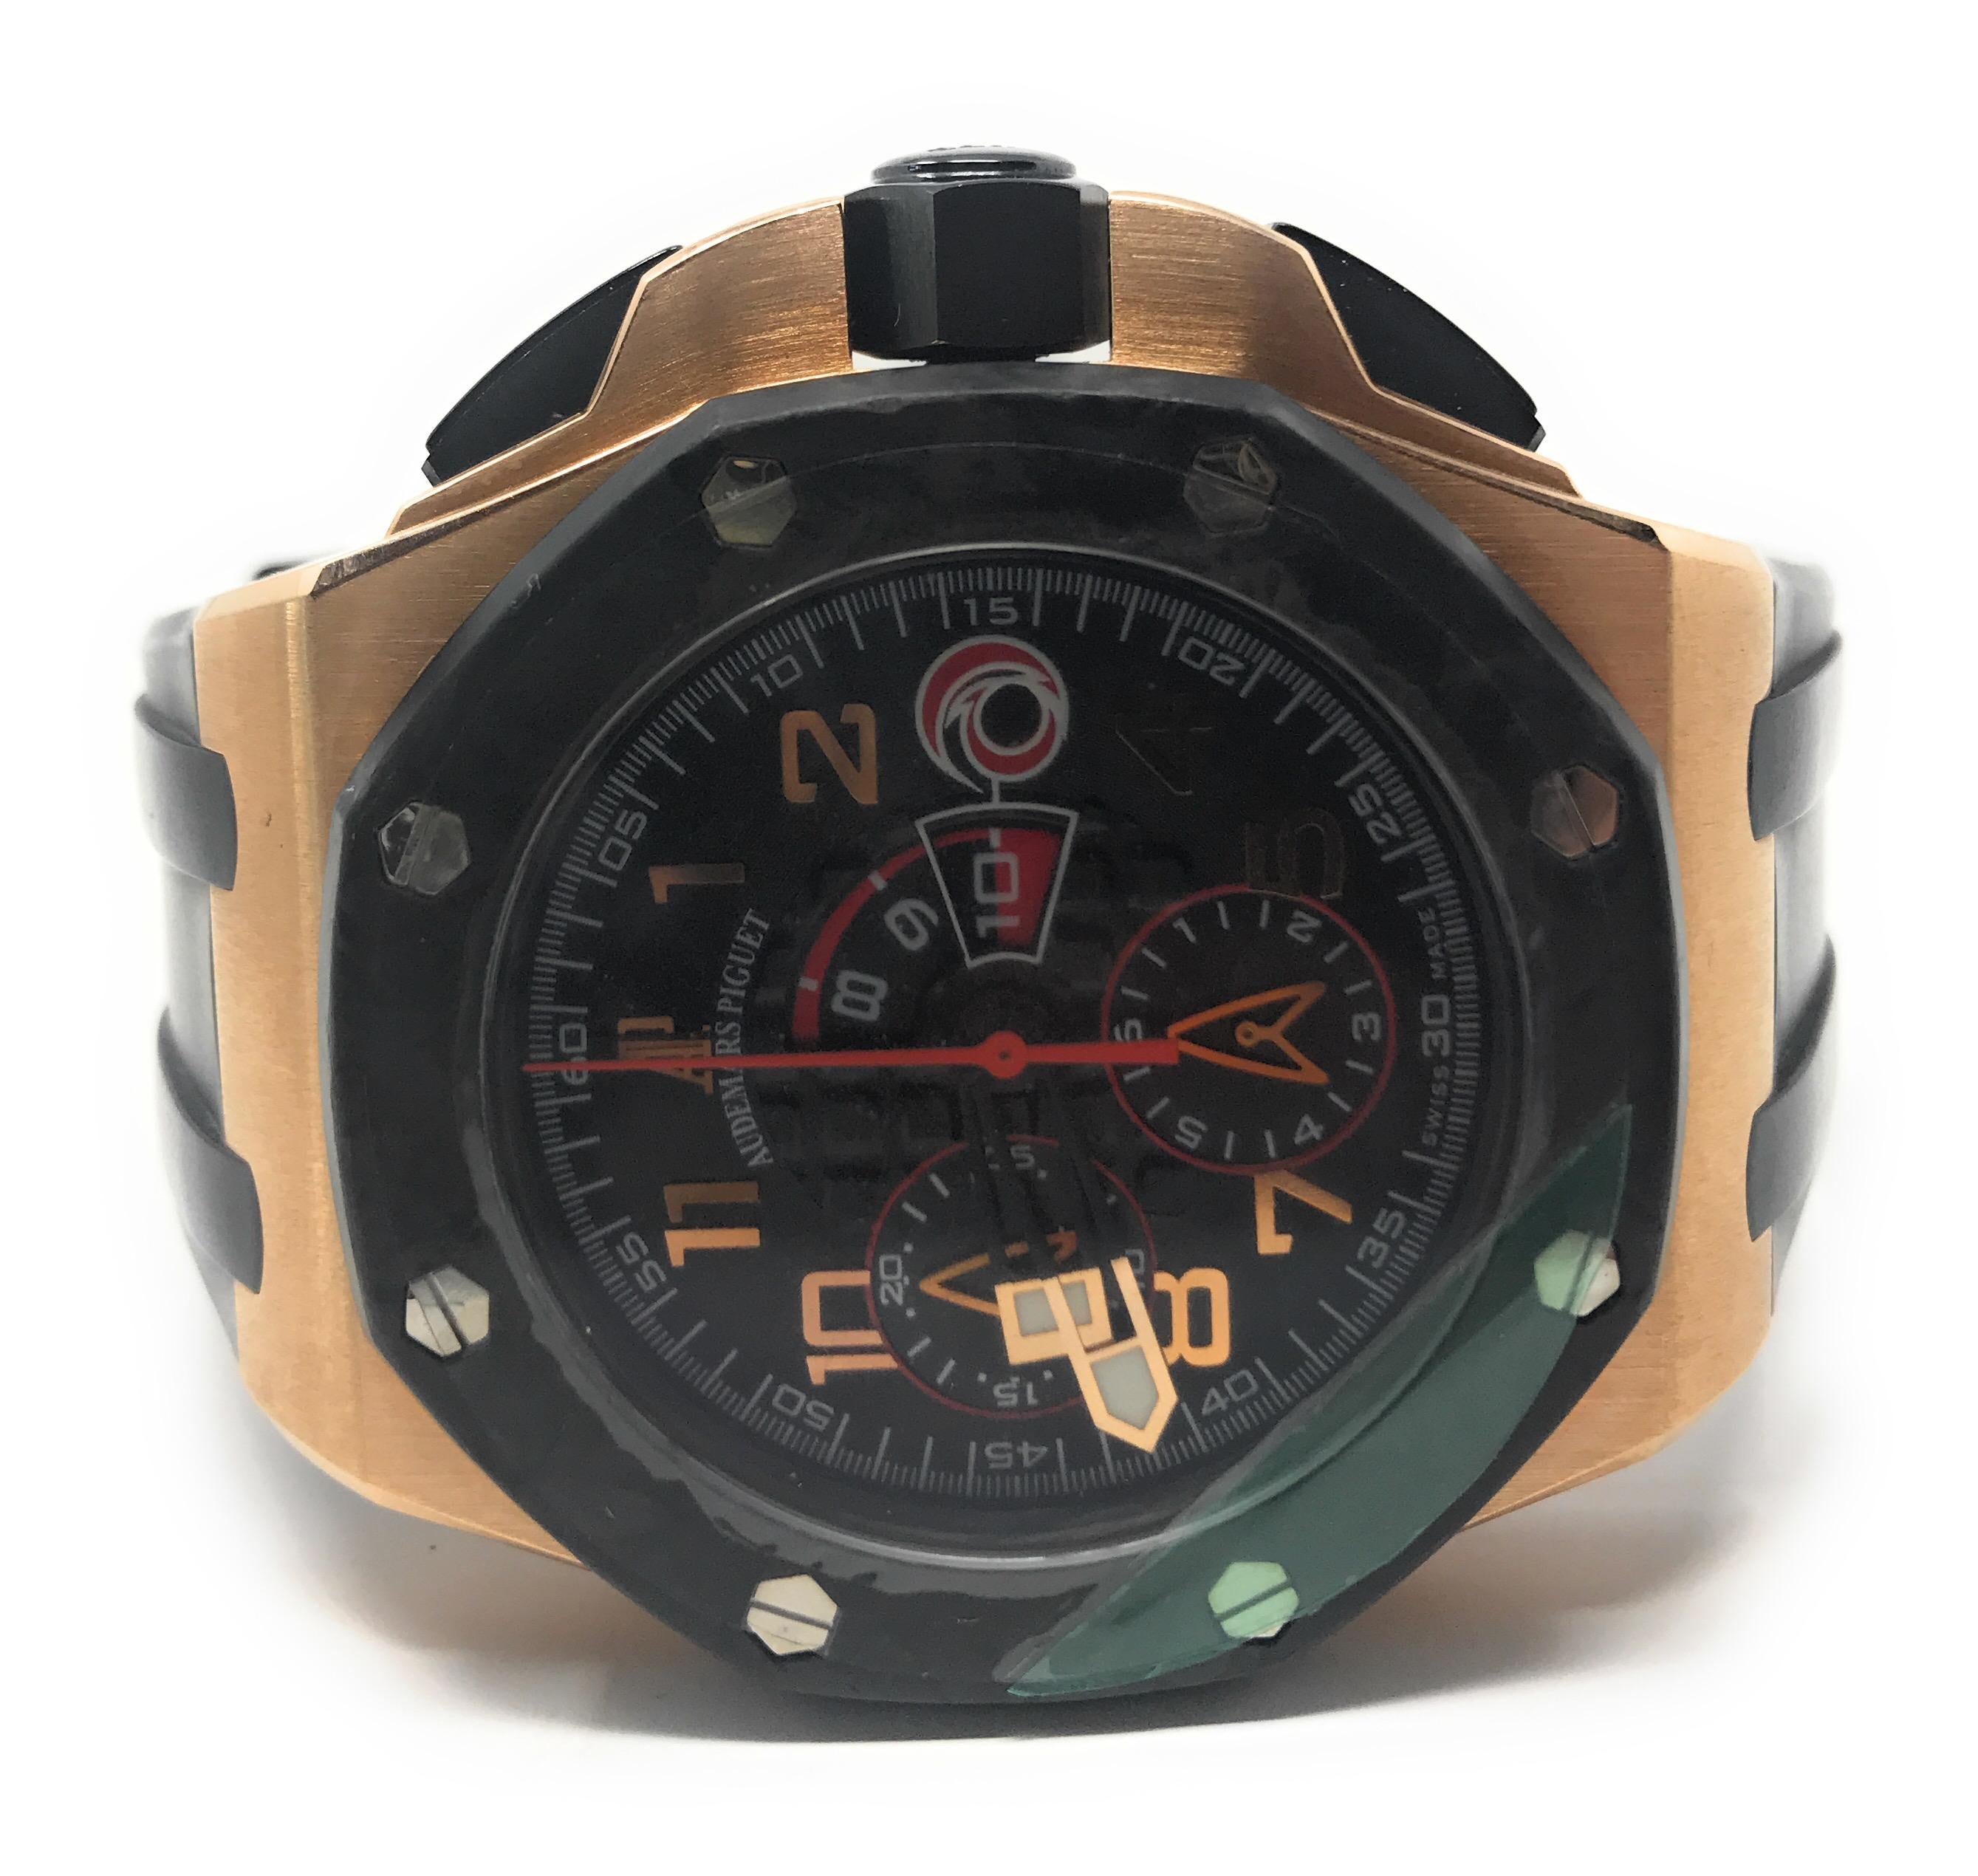 Audemars Piguet Royal Oak Offshore Chronograph In Good Condition For Sale In Los Angeles, CA